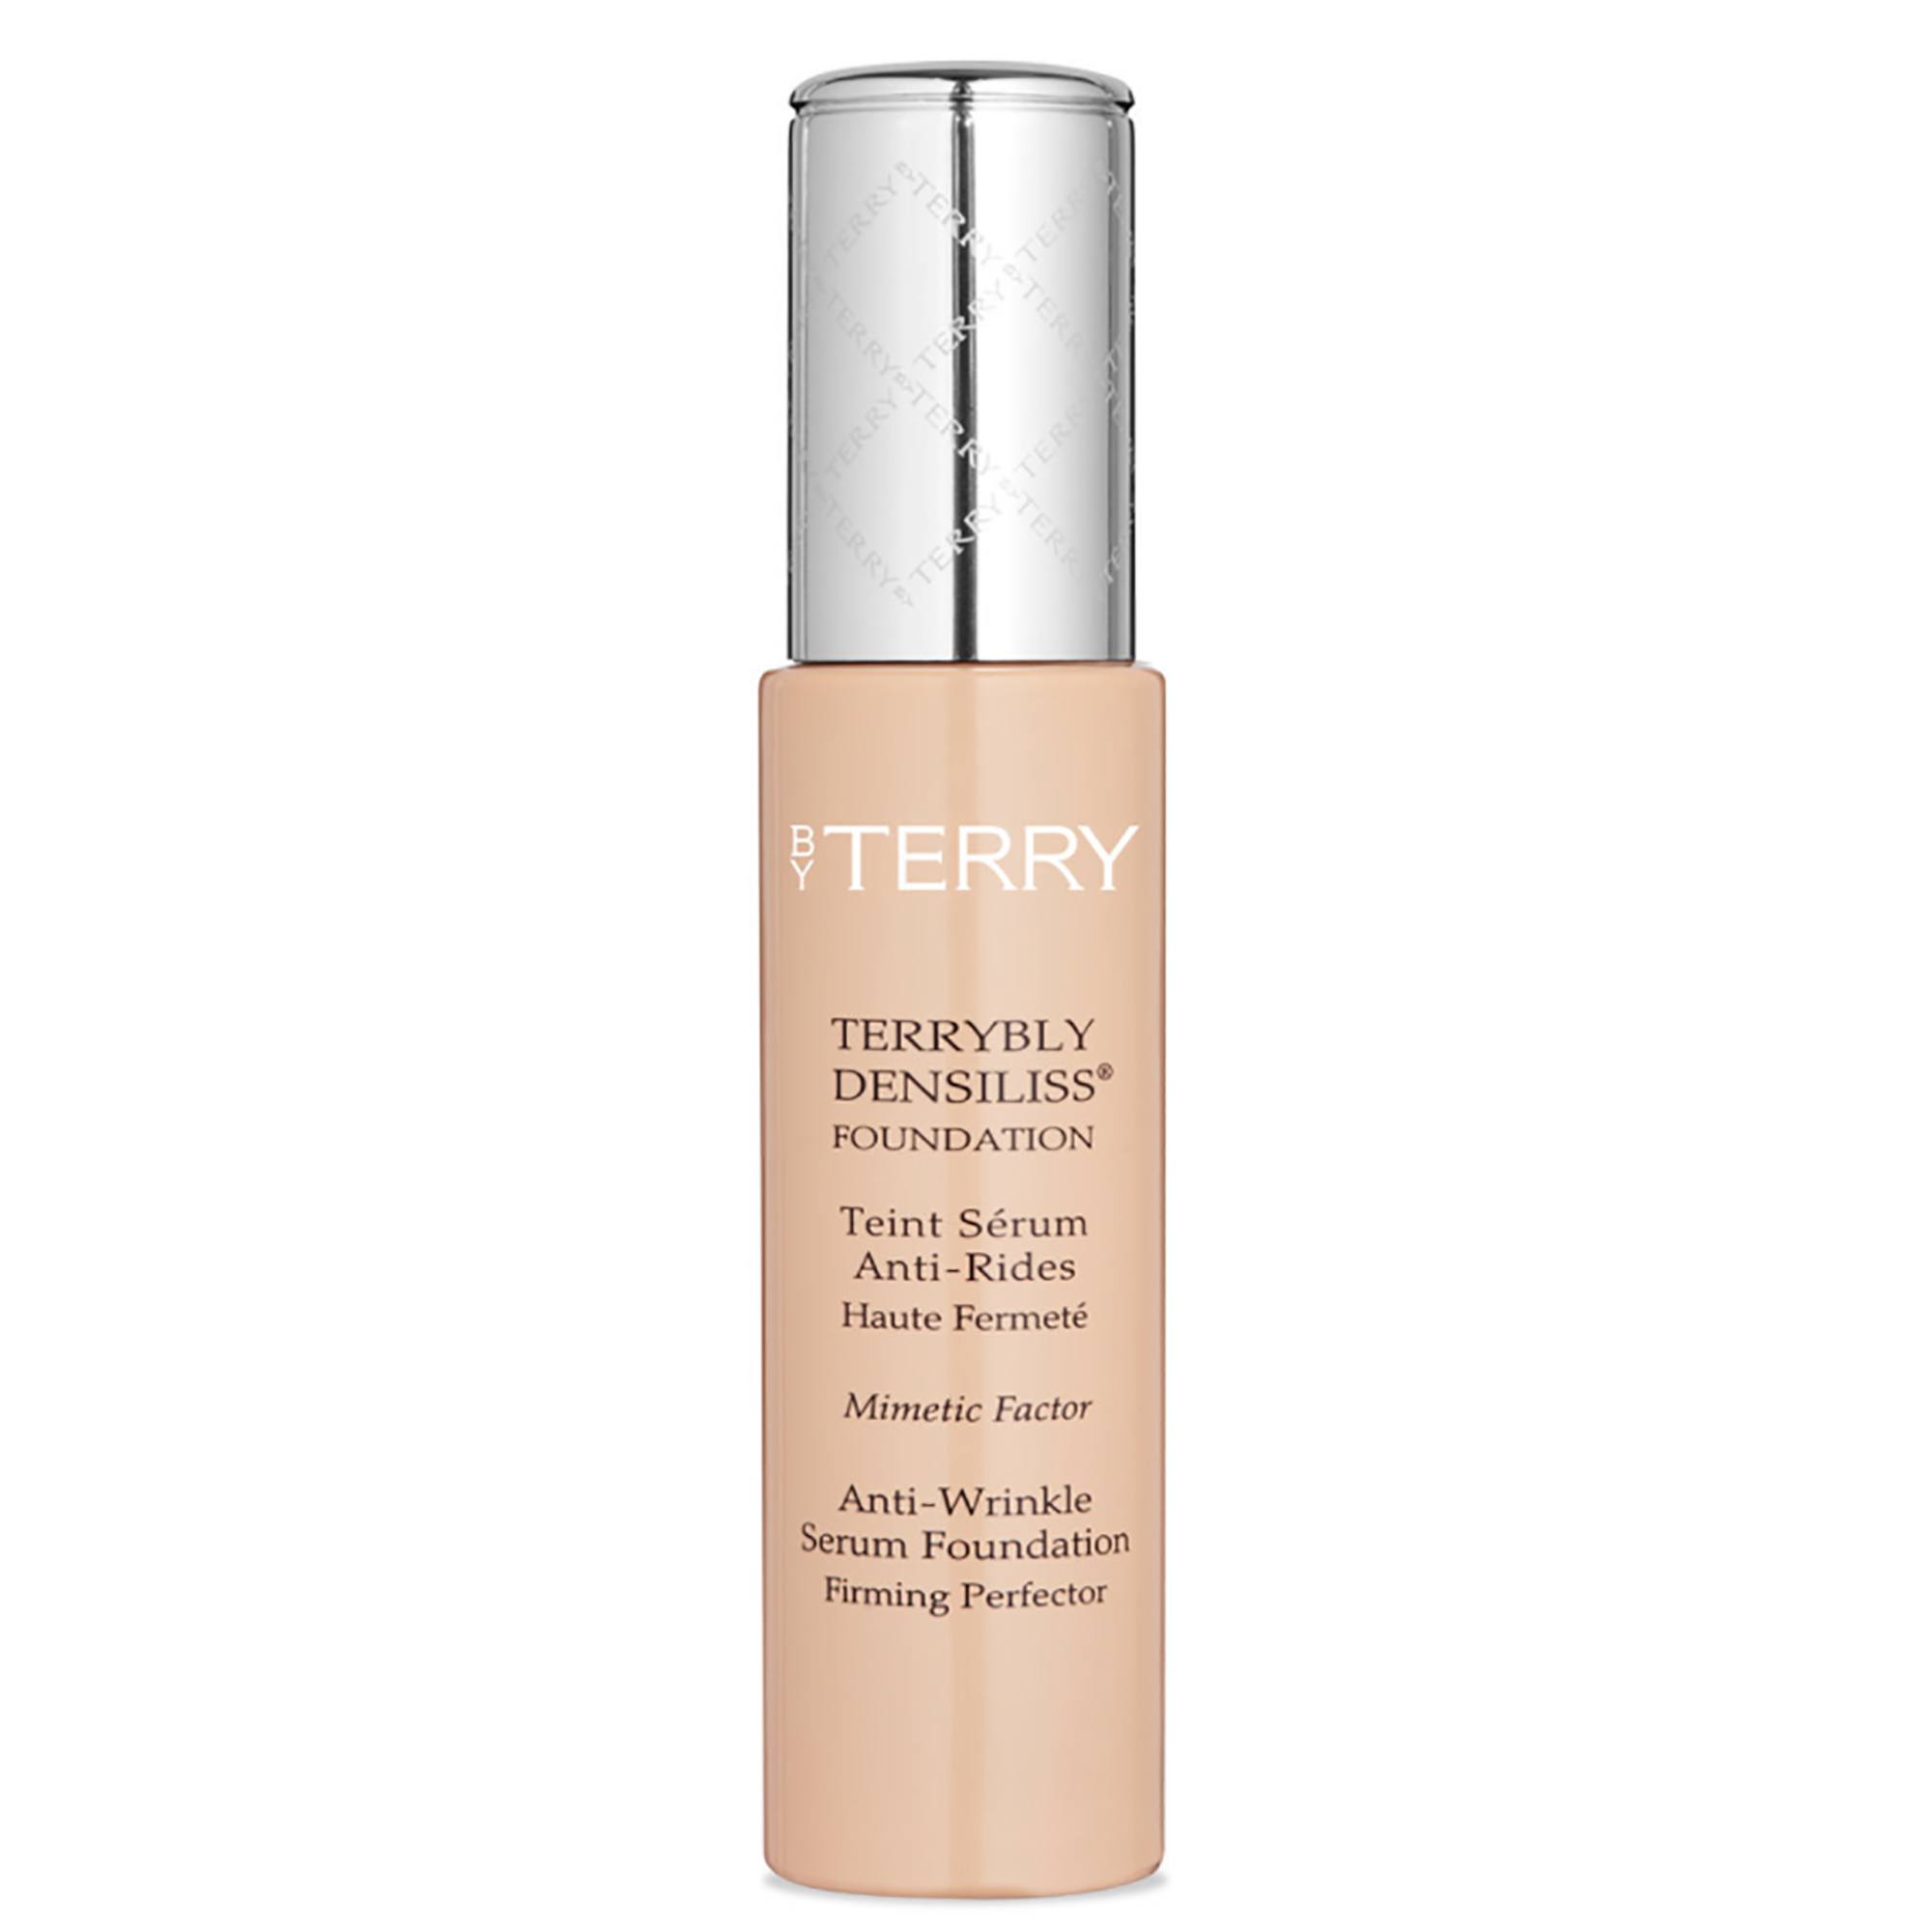 By Terry Terrybly Densiliss Anti-Wrinkle Serum Foundation #5 Rosy Sand